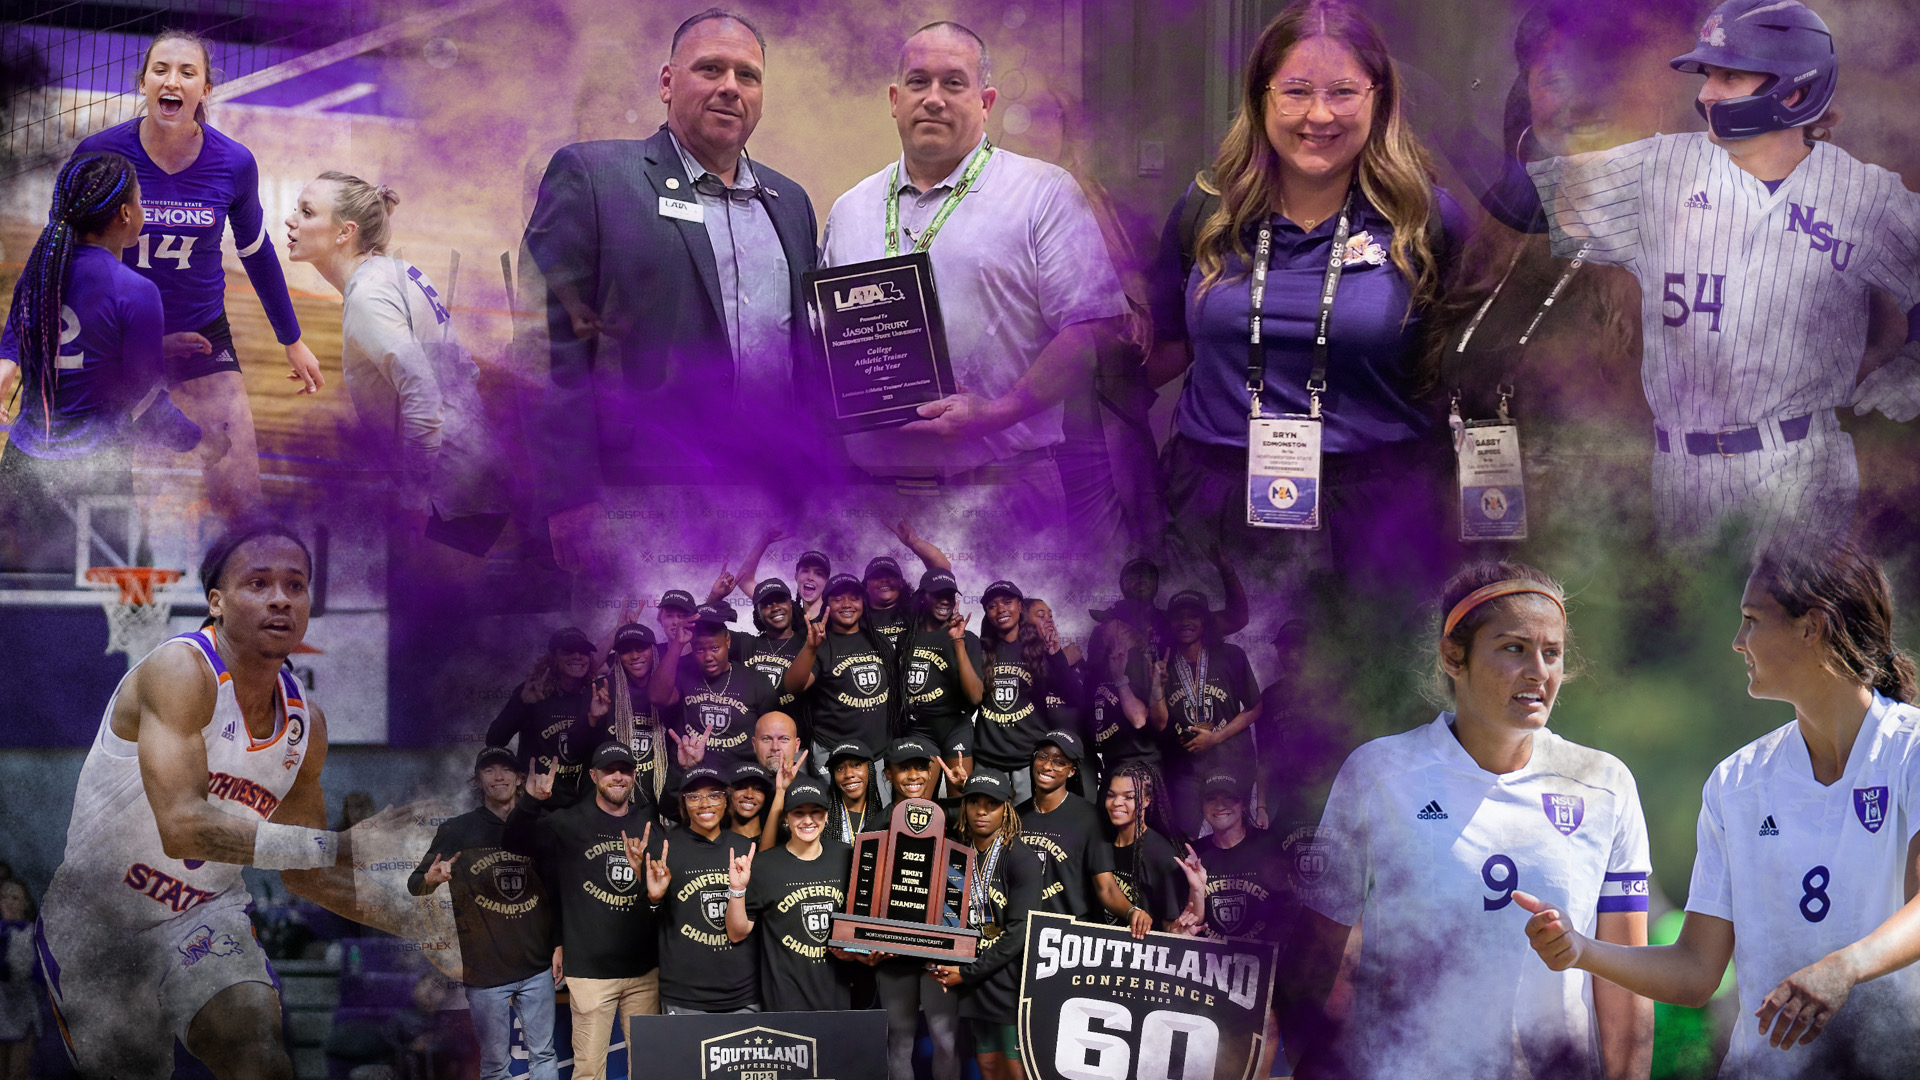 2012 NCAA Division I Football Championship Game, Dec. 20 e-Newsletter -  Southland Conference